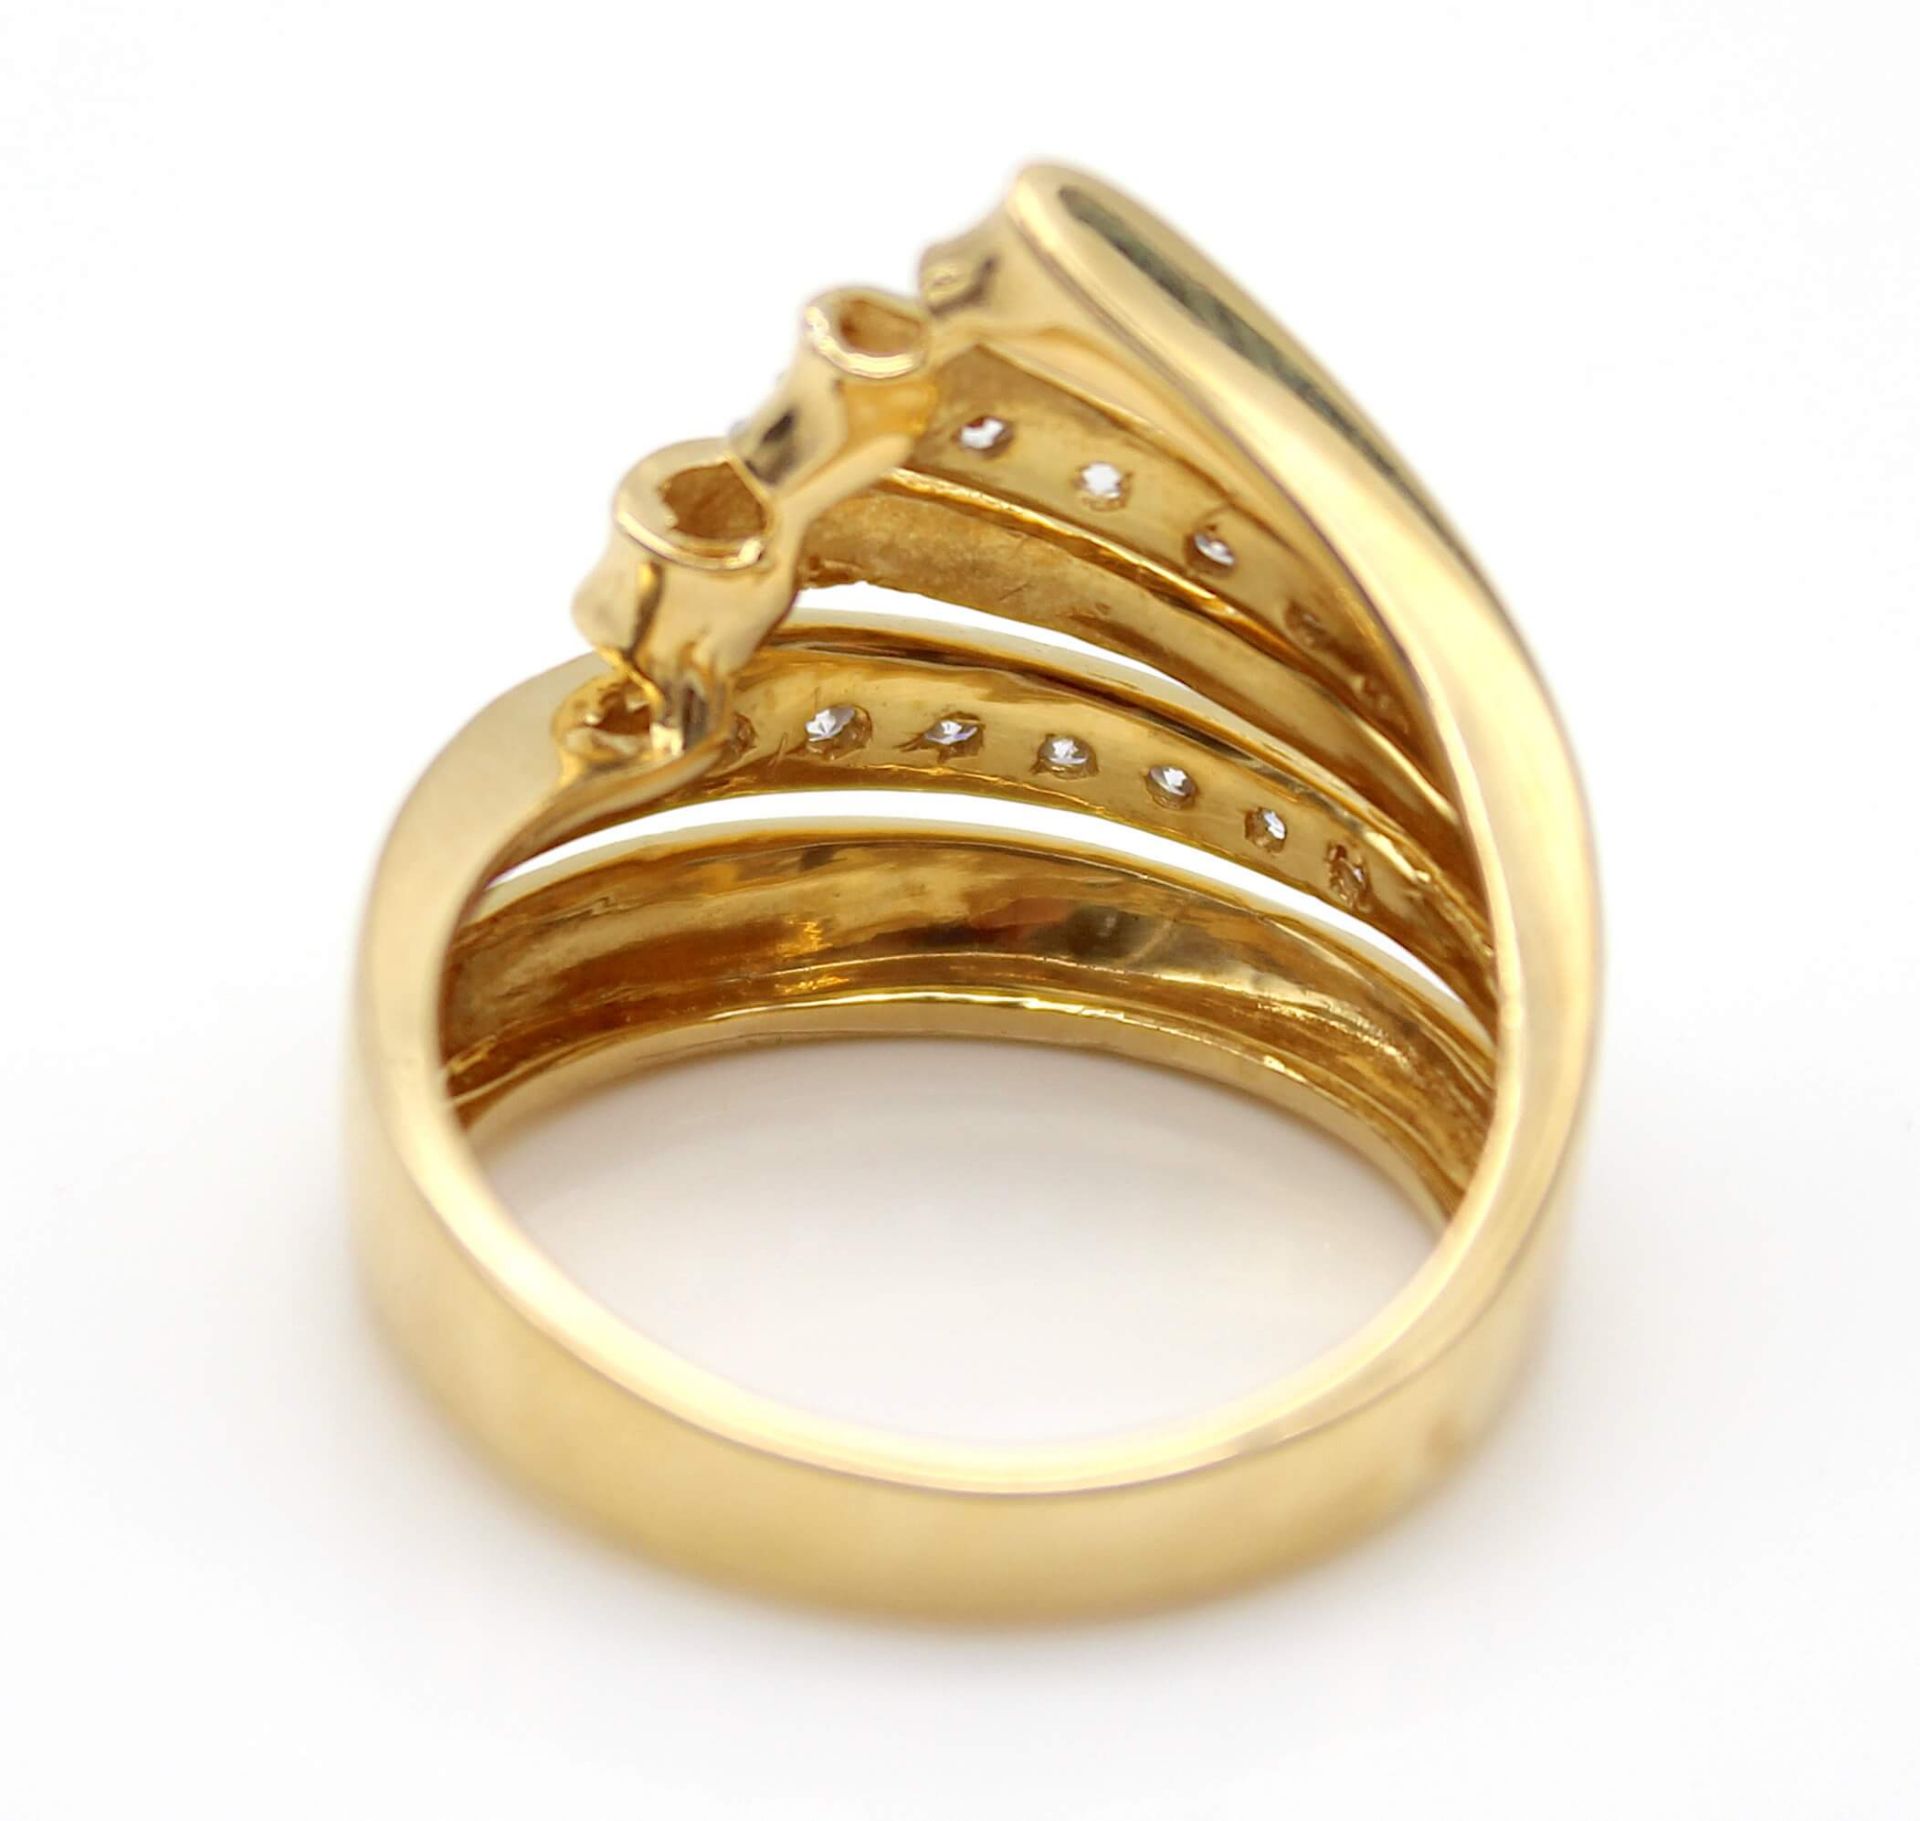 Ring with brilliants 750 gold - Image 3 of 3